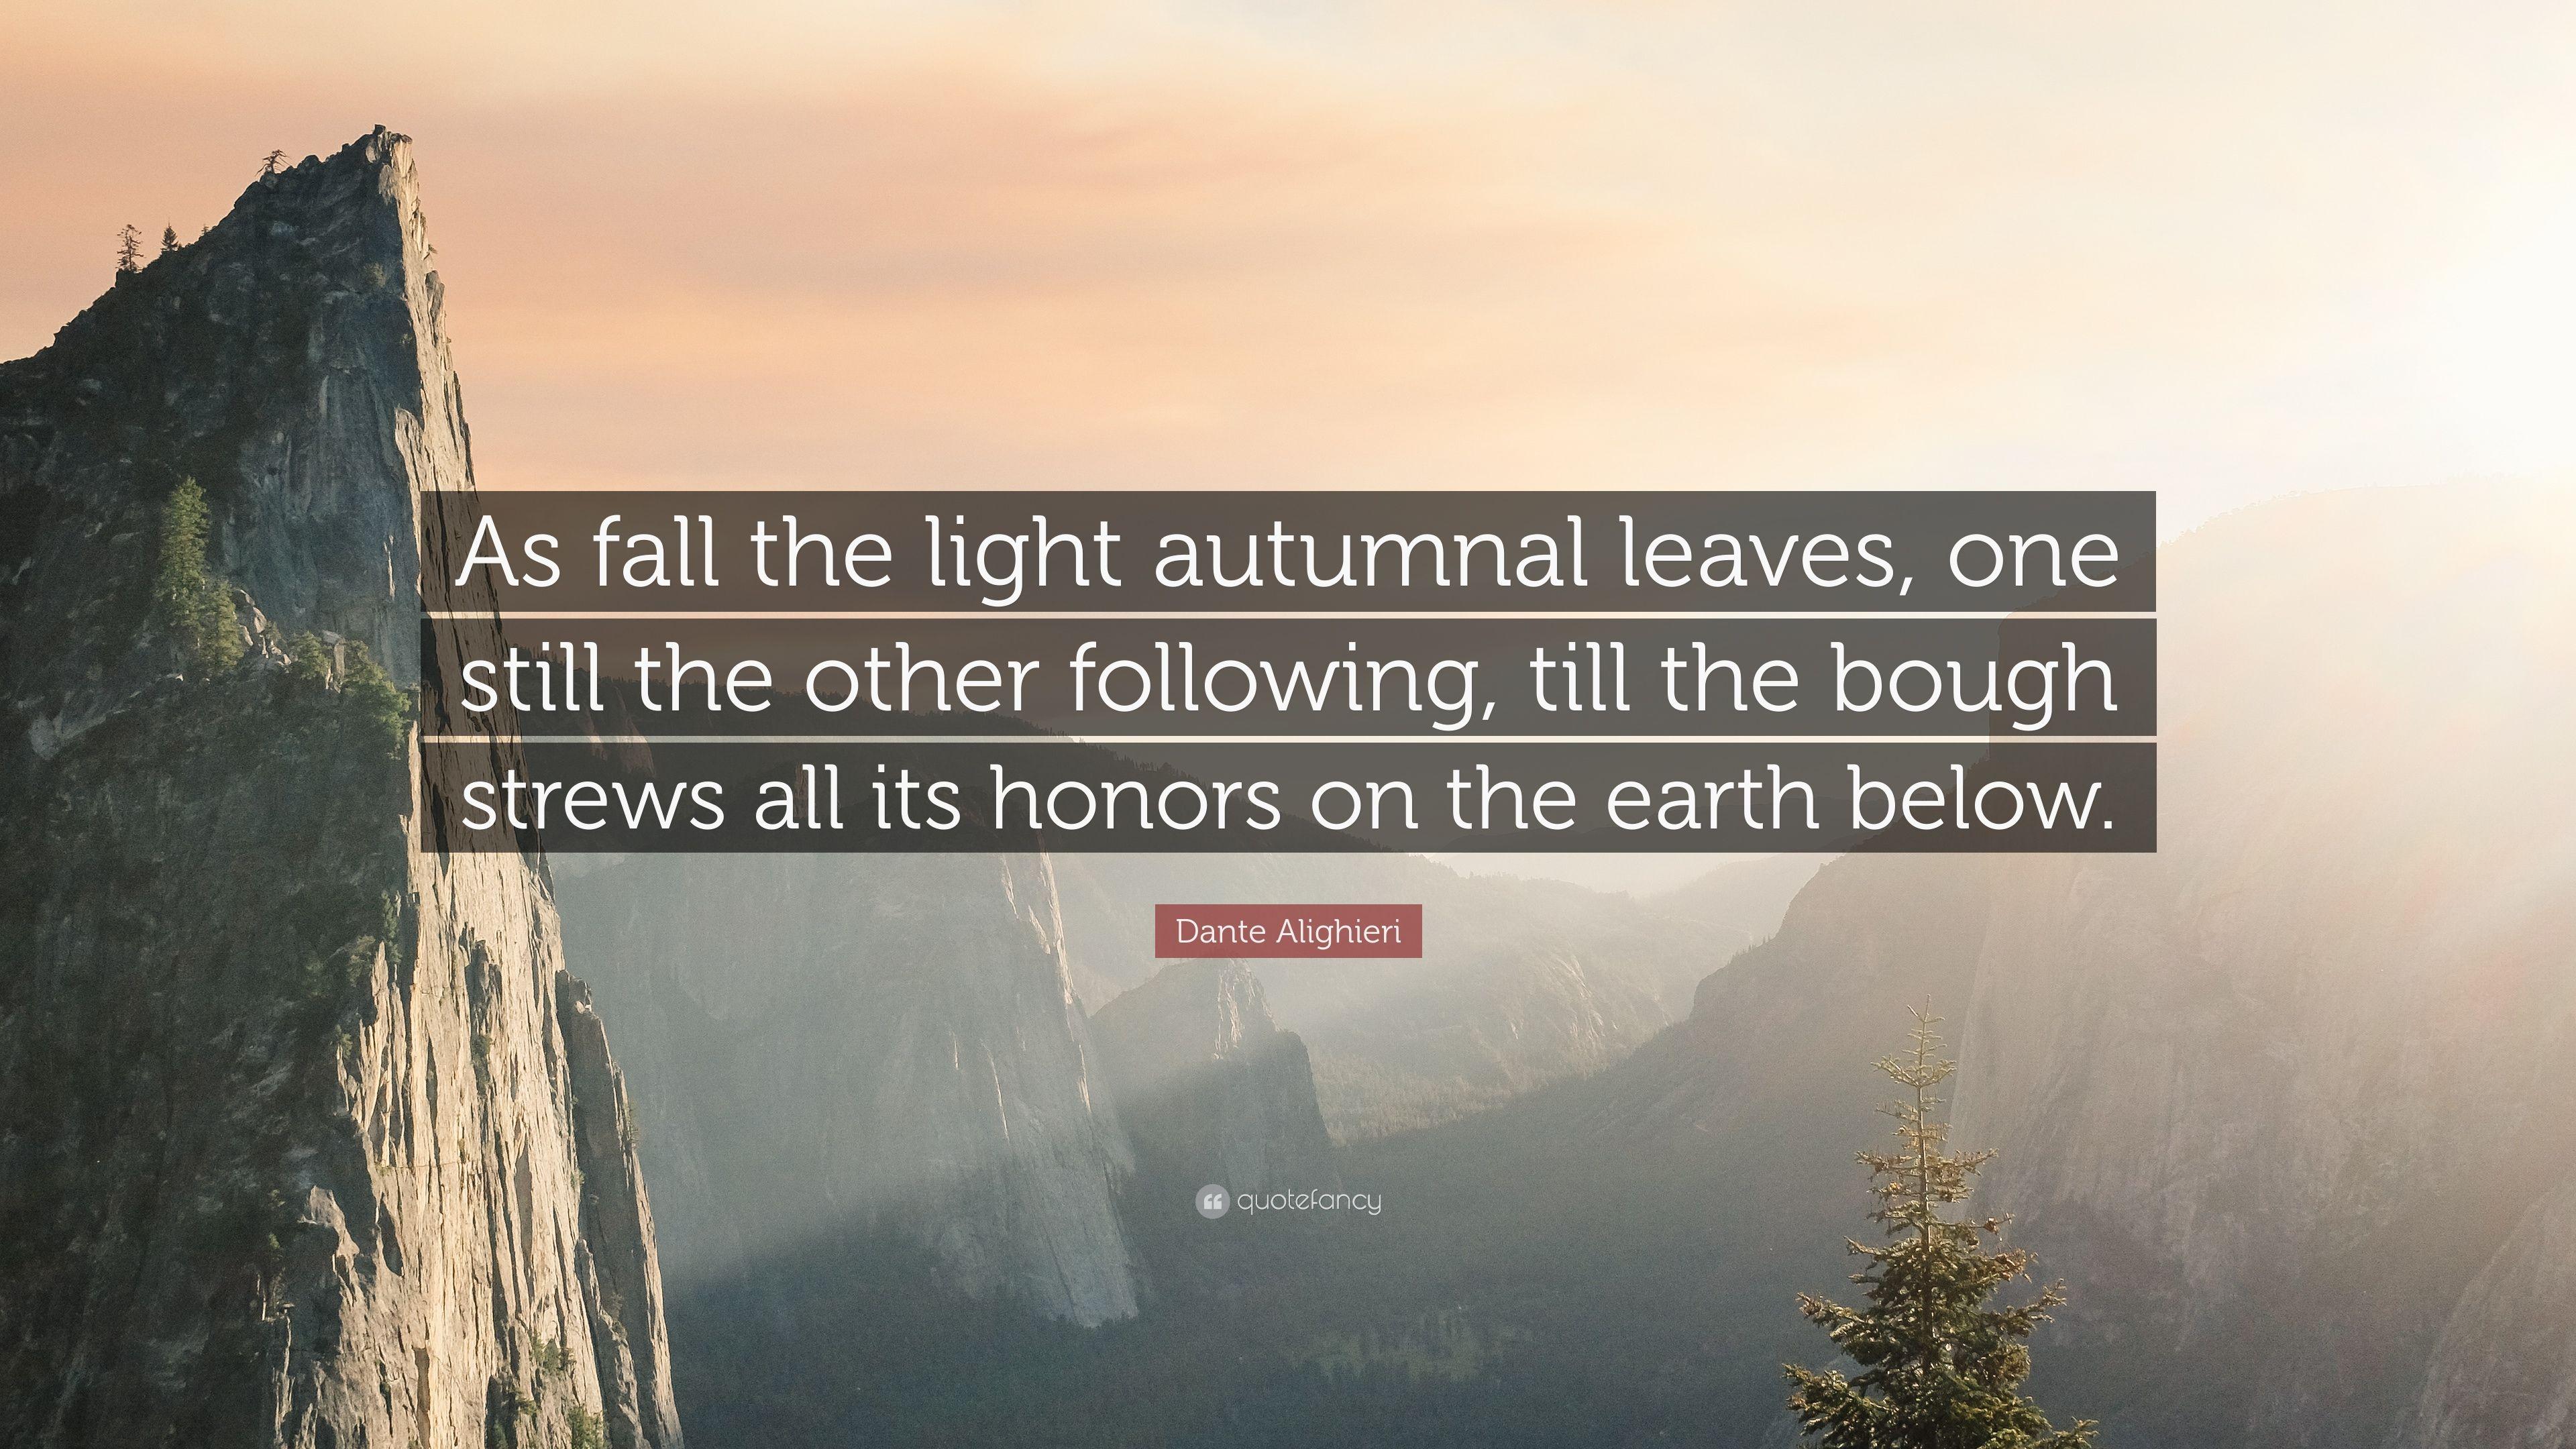 Dante Alighieri Quote: “As fall the light autumnal leaves, one still